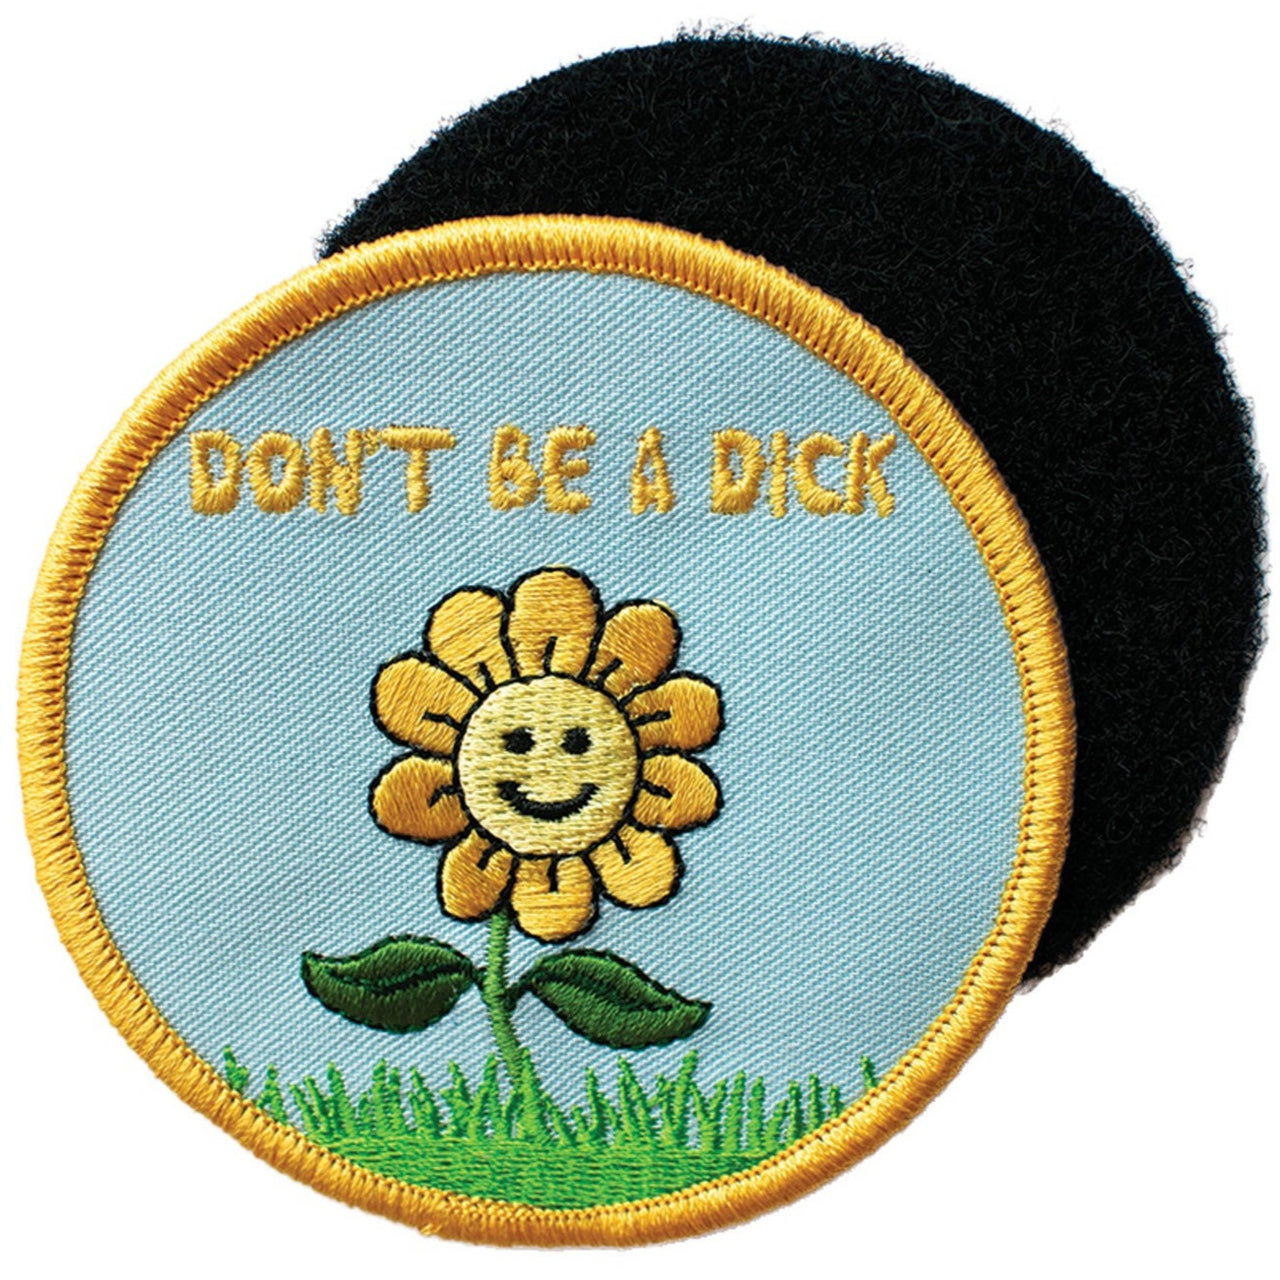 Don't Be A Dick (Hook & Loop Patch)